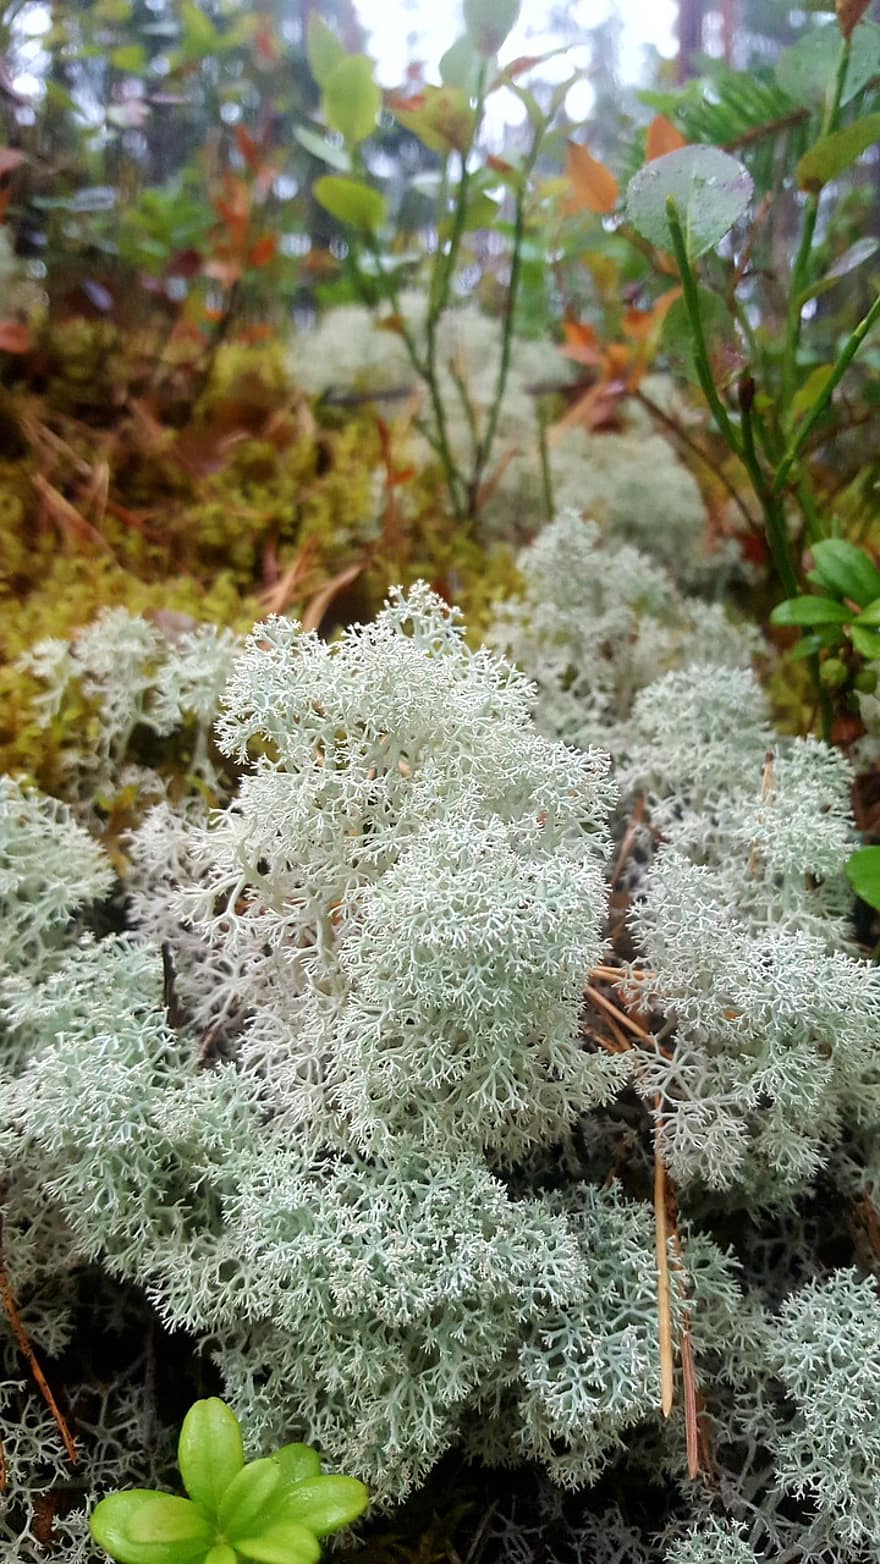 Star Tipped Cup Lichen, Lichens, Plants, Cladonia, Vegetation, Forest, Nature, Macro